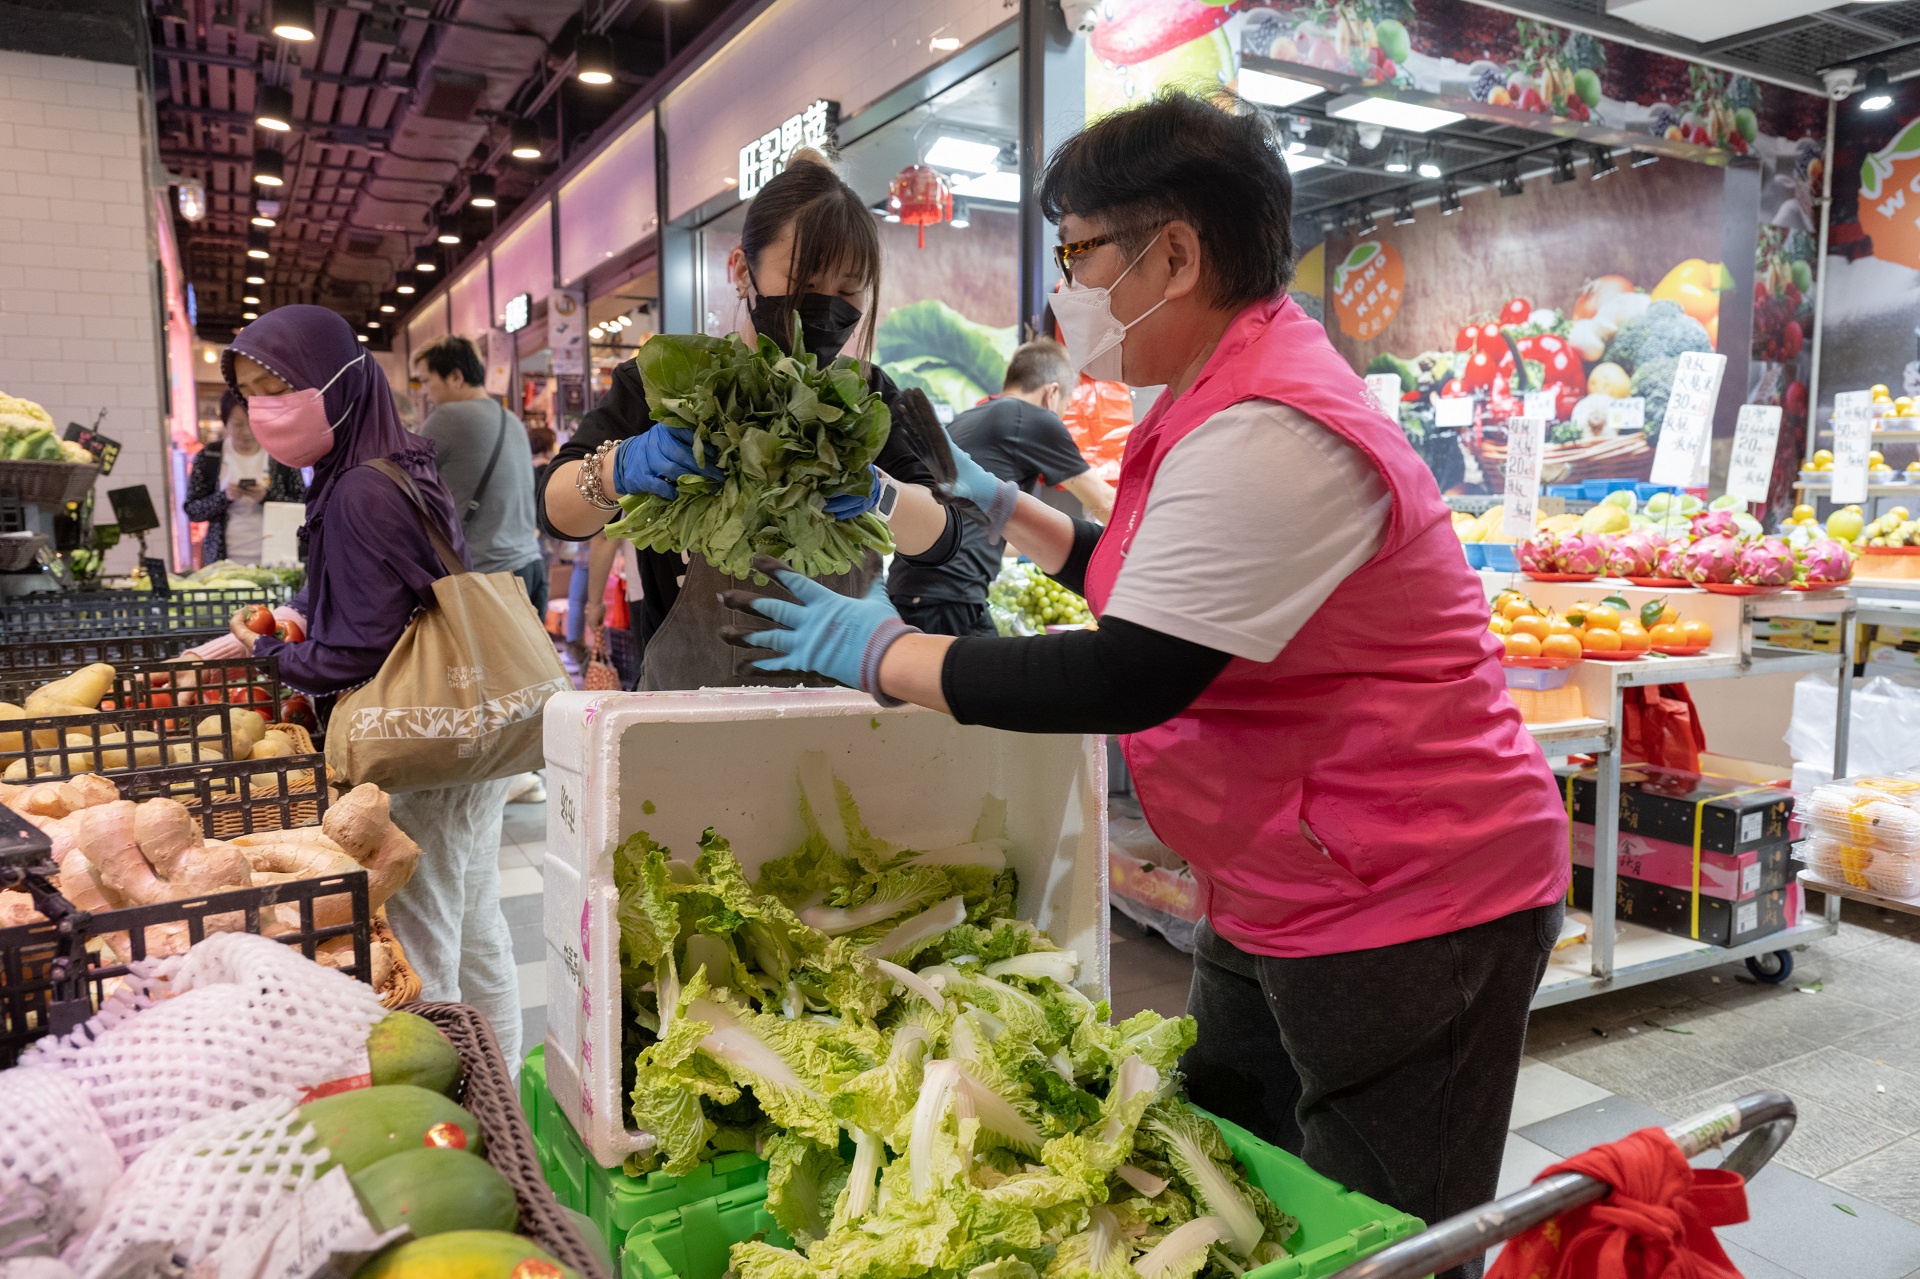 People handle vegetables in a market.